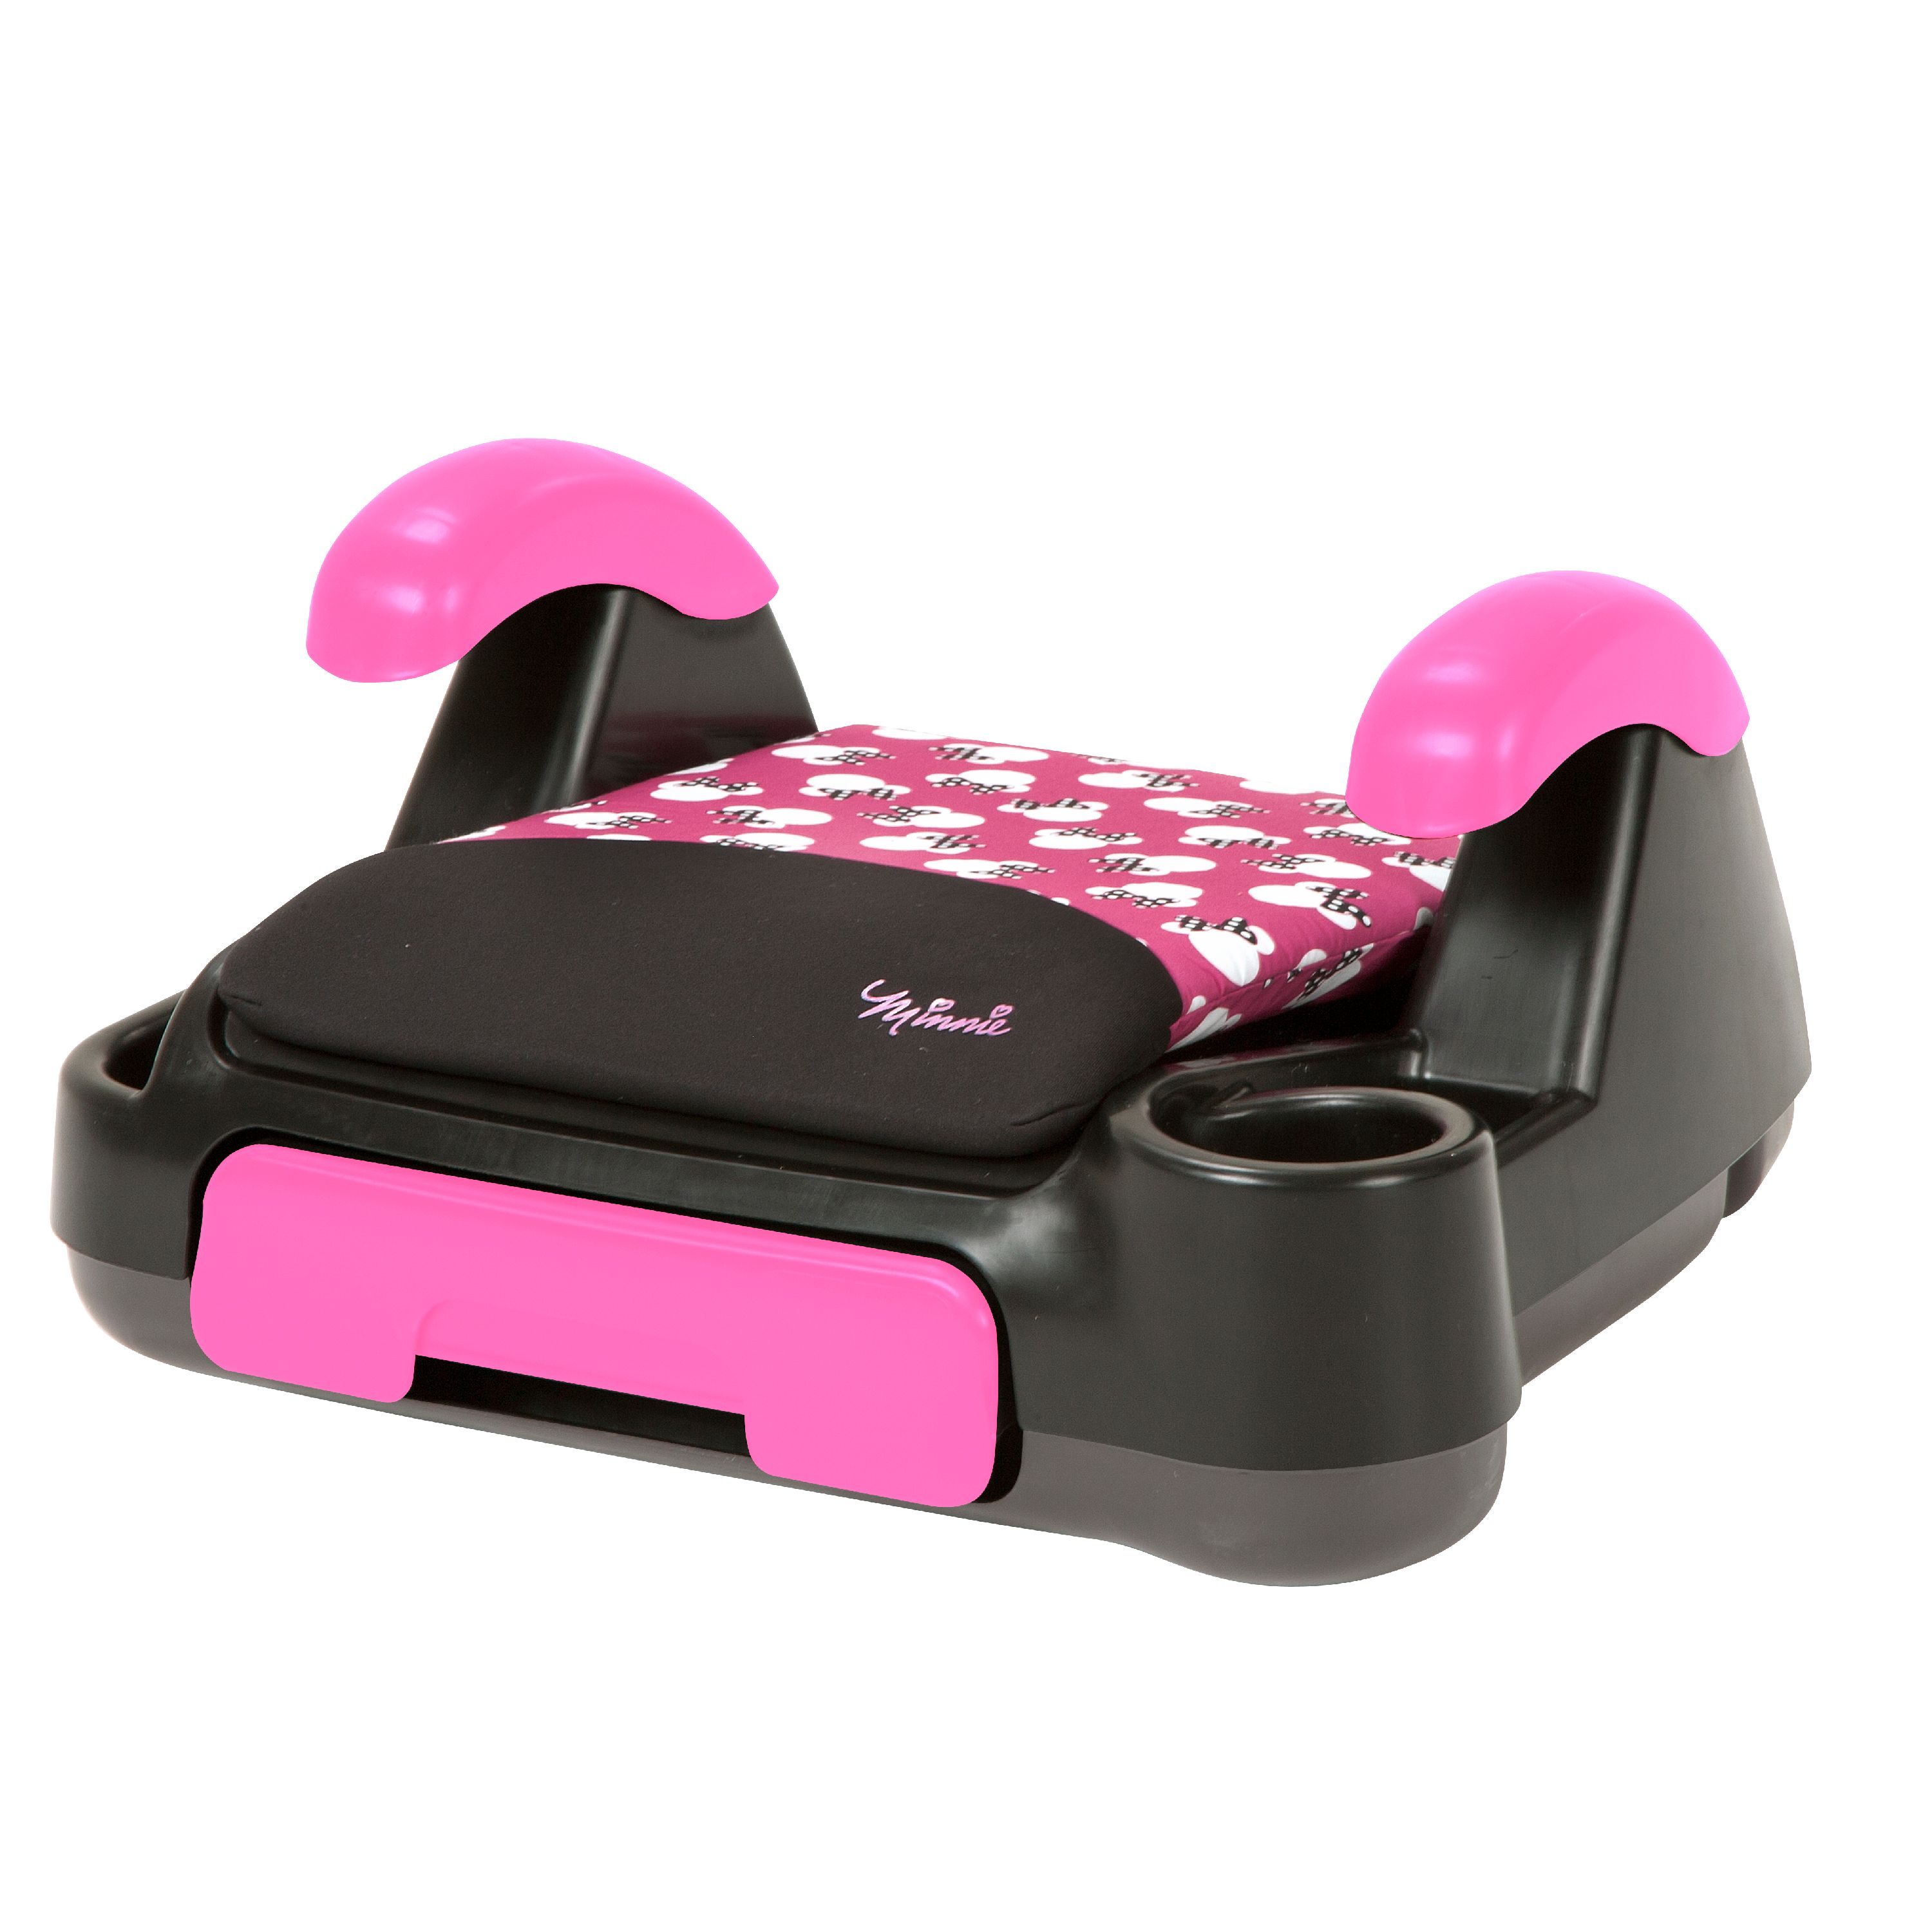 Disney Store 'n Go Backless Booster Car Seat, Minnie Silhouette Pink - image 3 of 7